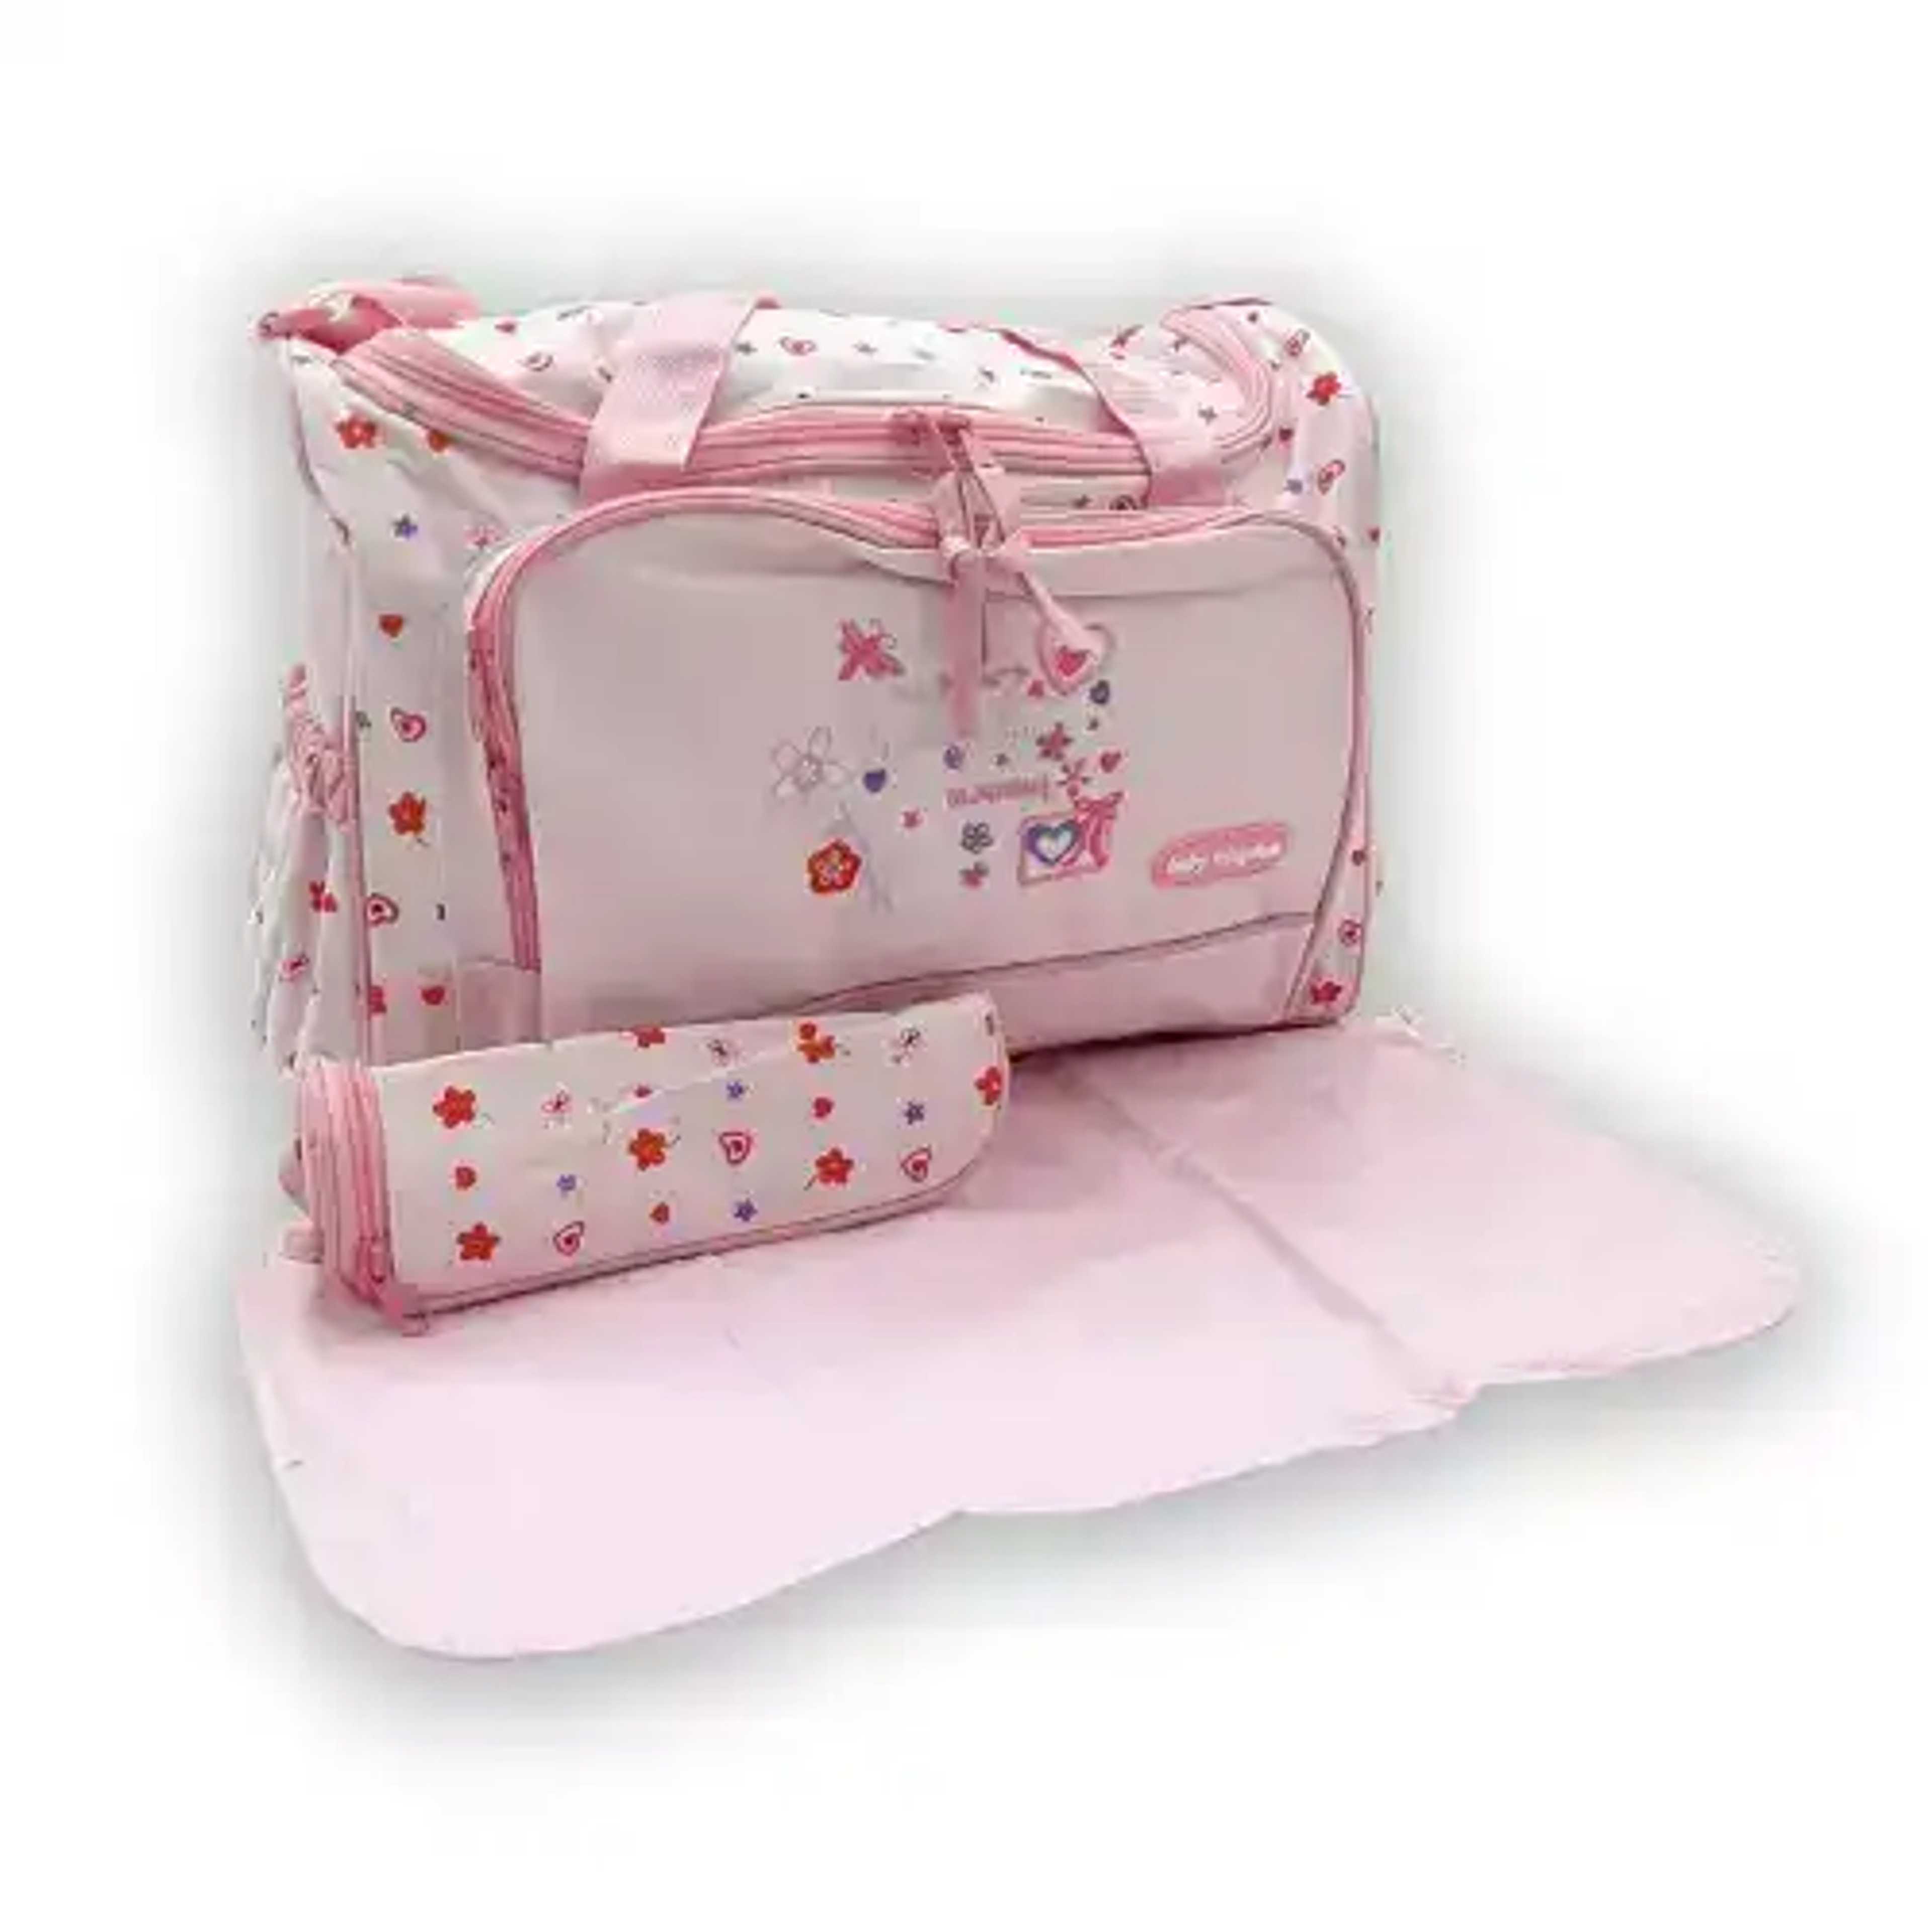 Baby Bag/Baby Accessories Baby/Multi-Purpose Bags

